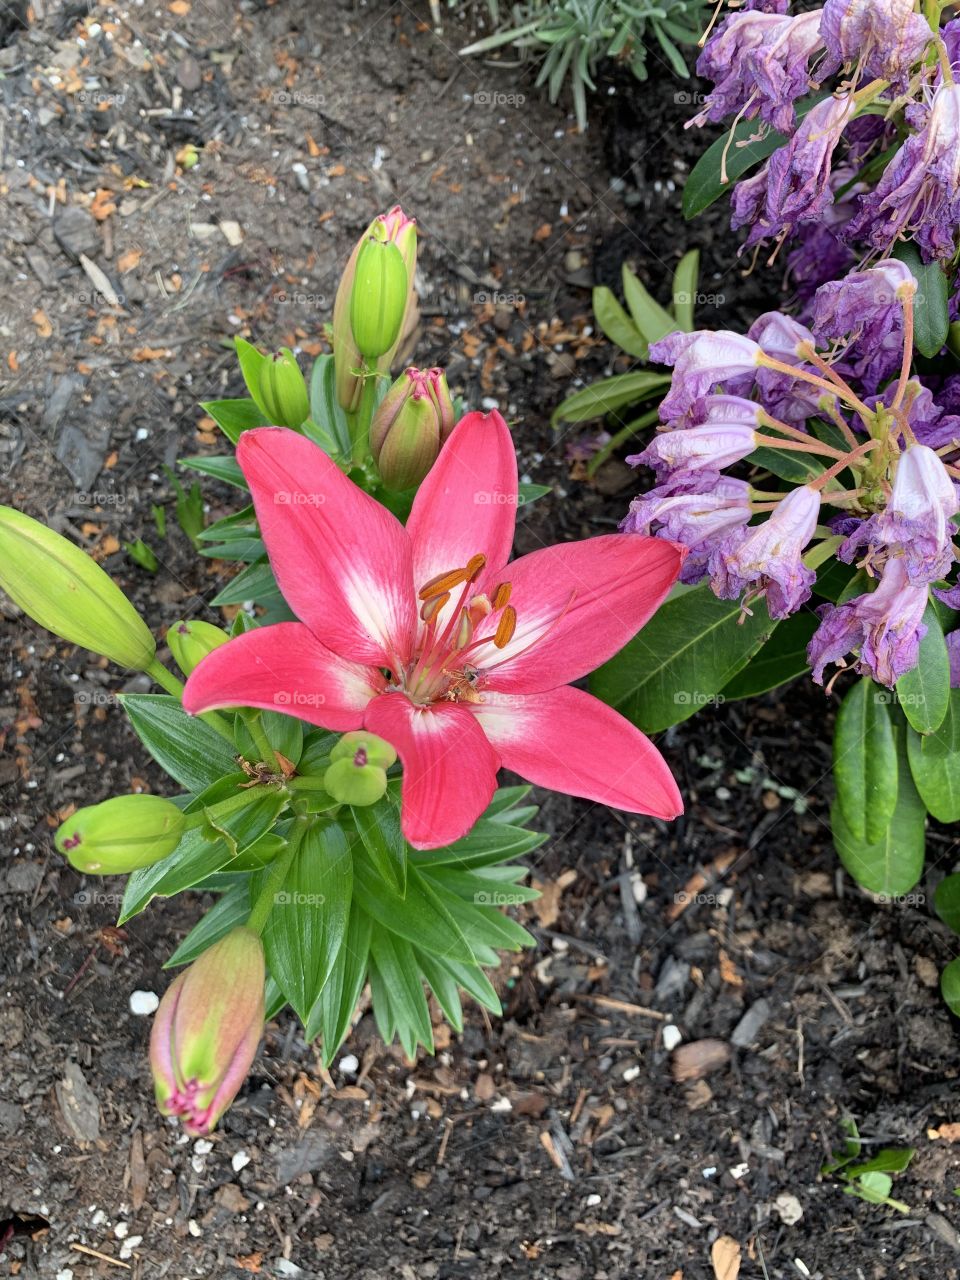 Just as Spring ends the lilies are beginning to blow for summer. I love my flower beds. 